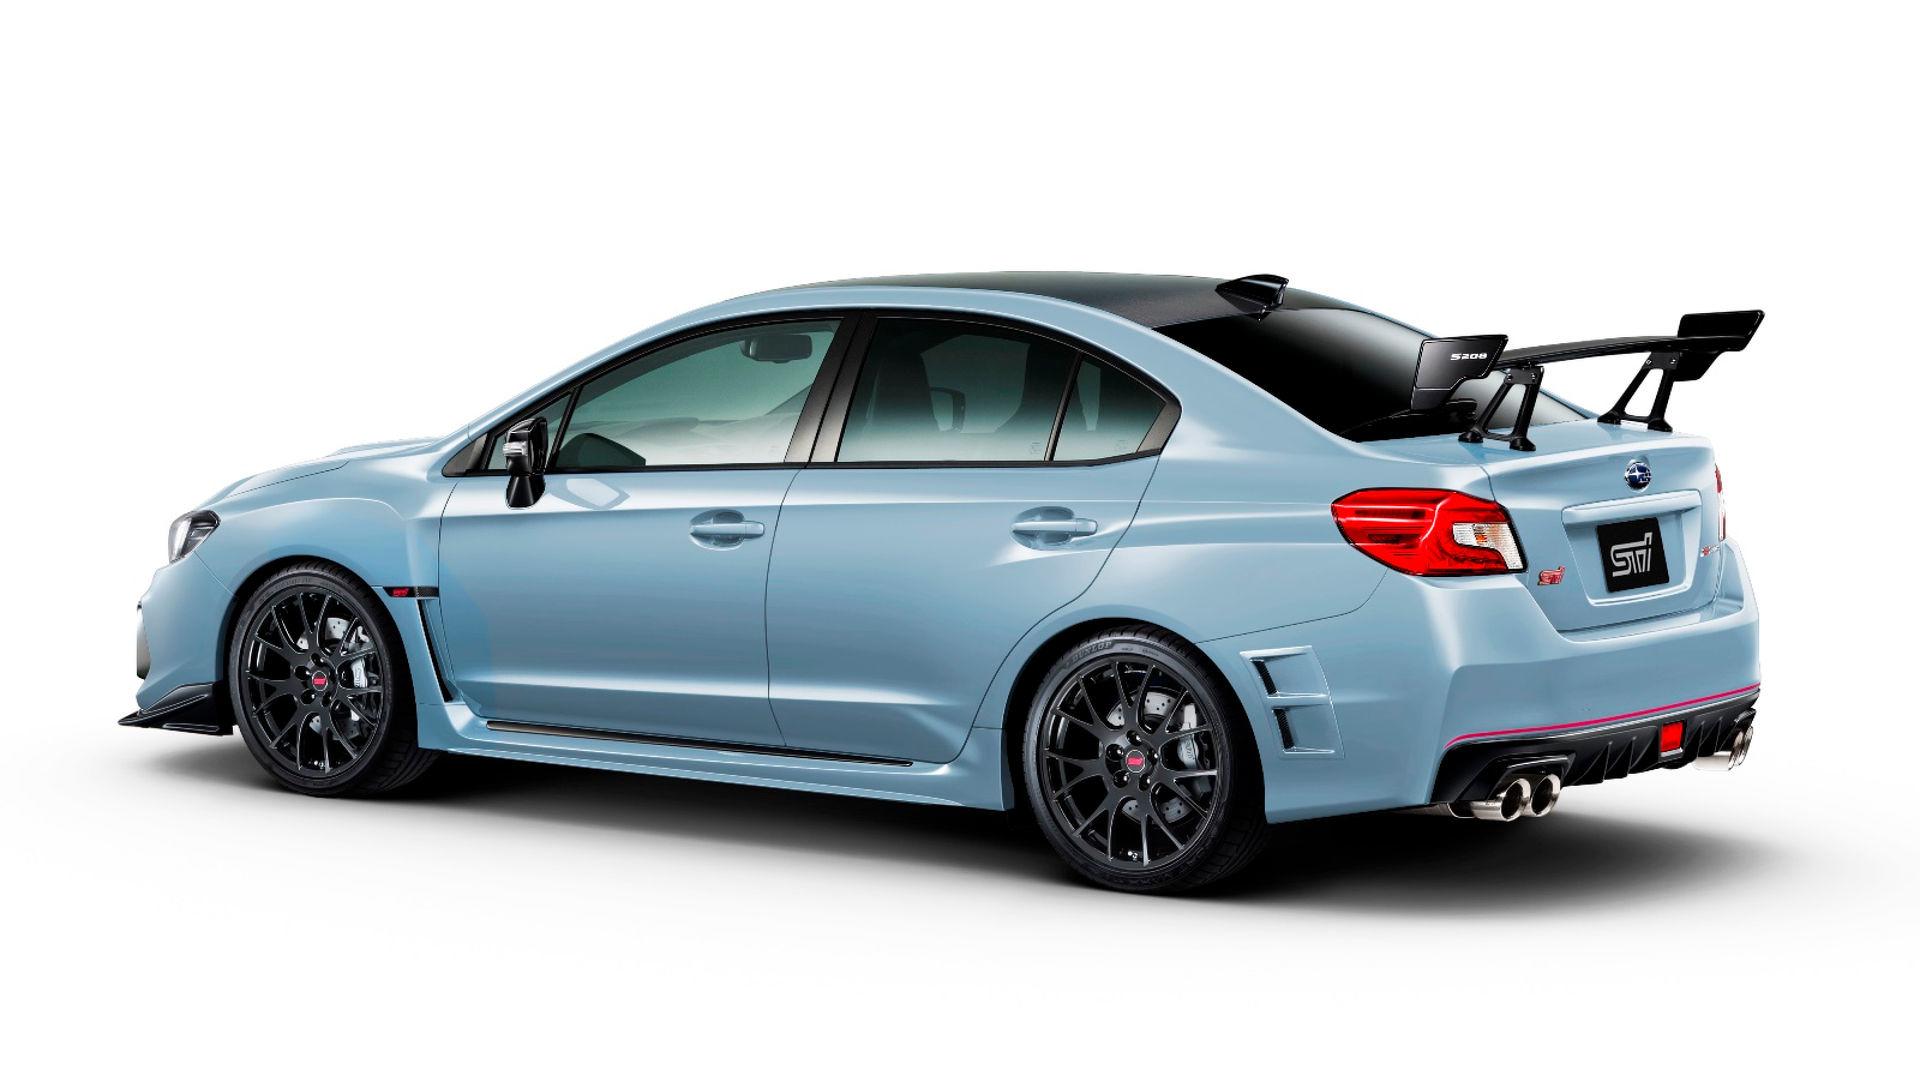 Subaru Files Trademark For S209 Could It Be For New Wrx Sti